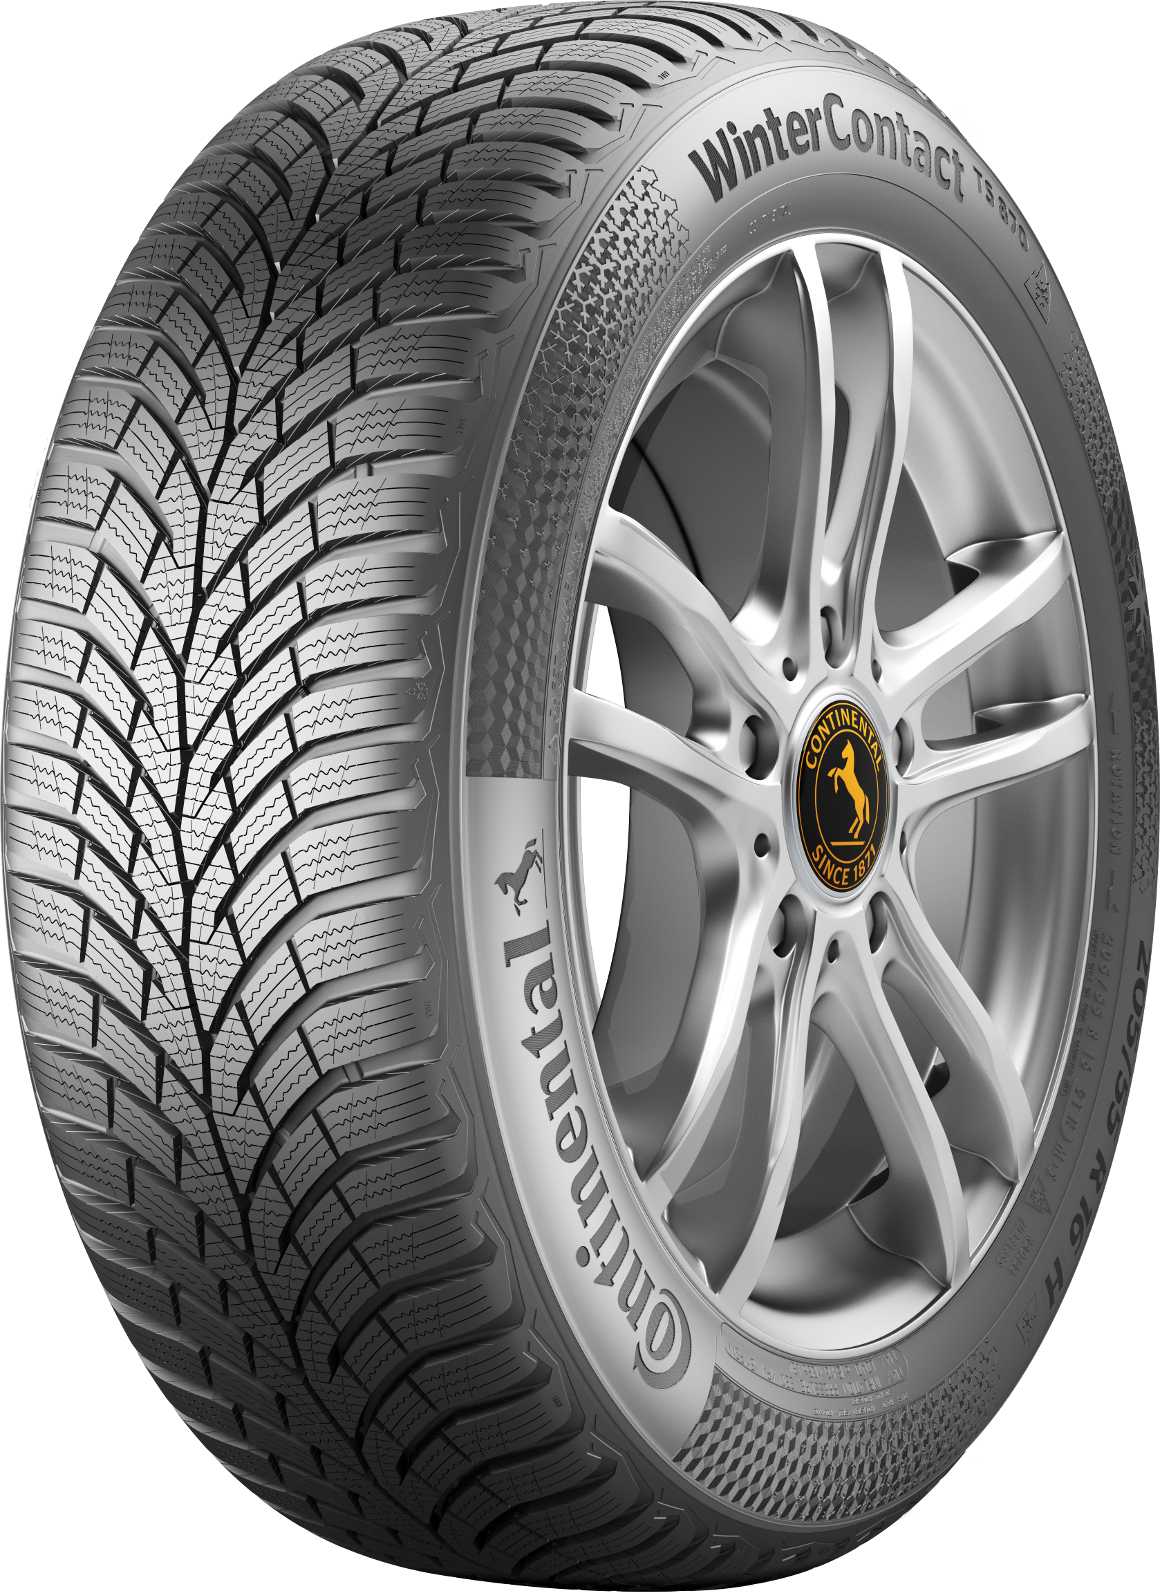    Continental Winter Contact TS870 215/55 R16 